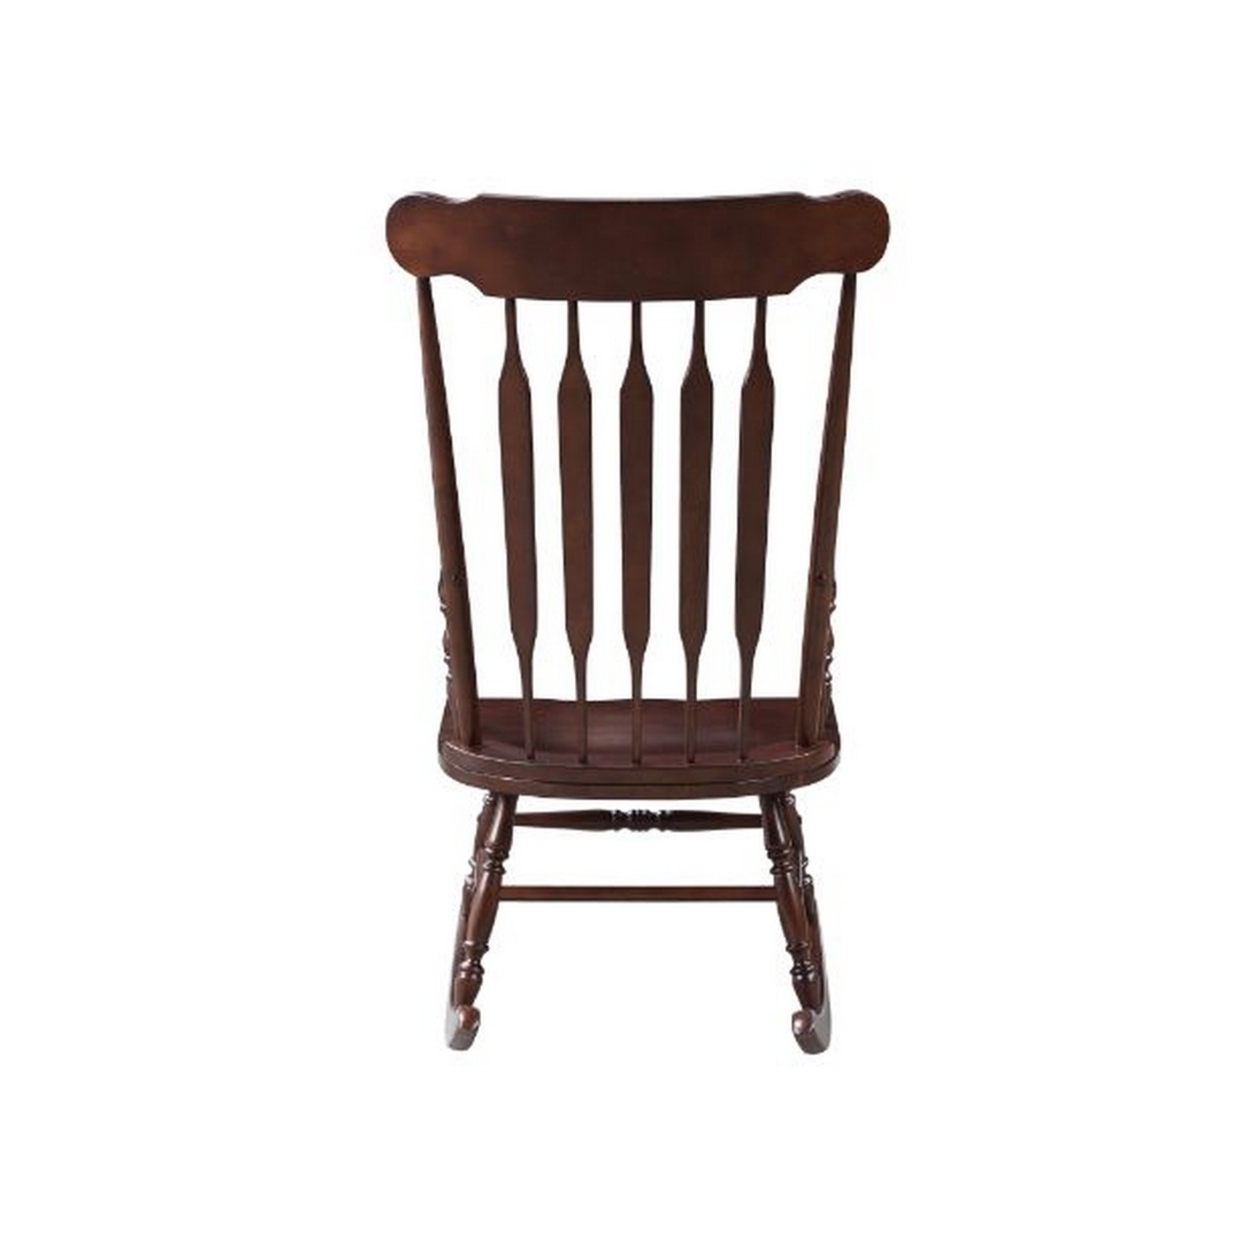 Rocking Chair With Wooden Frame And Slatted Back, Dark Brown- Saltoro Sherpi